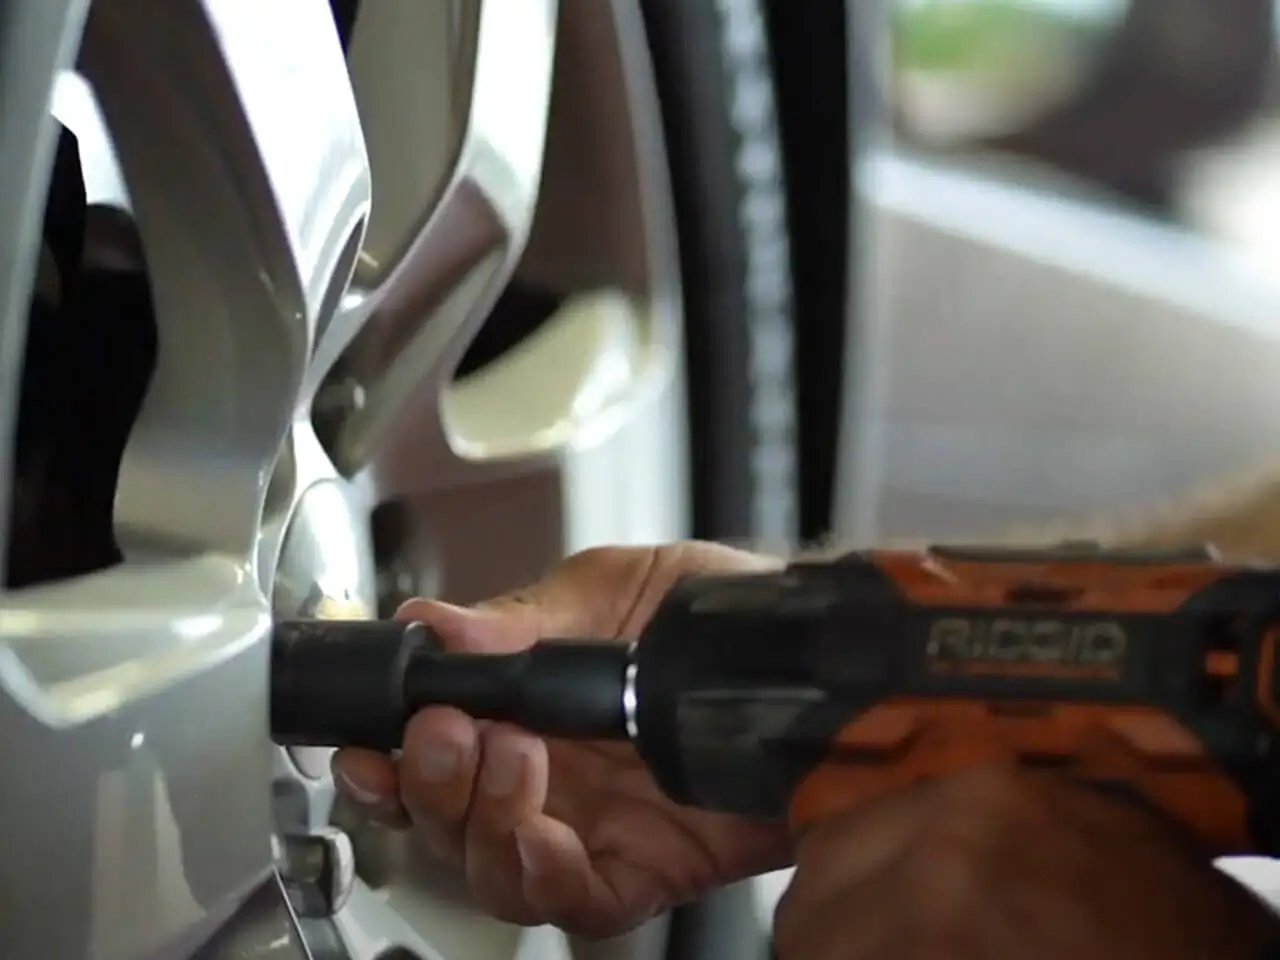 Grease Pro technician shown using impact wrench on wheel lug nuts